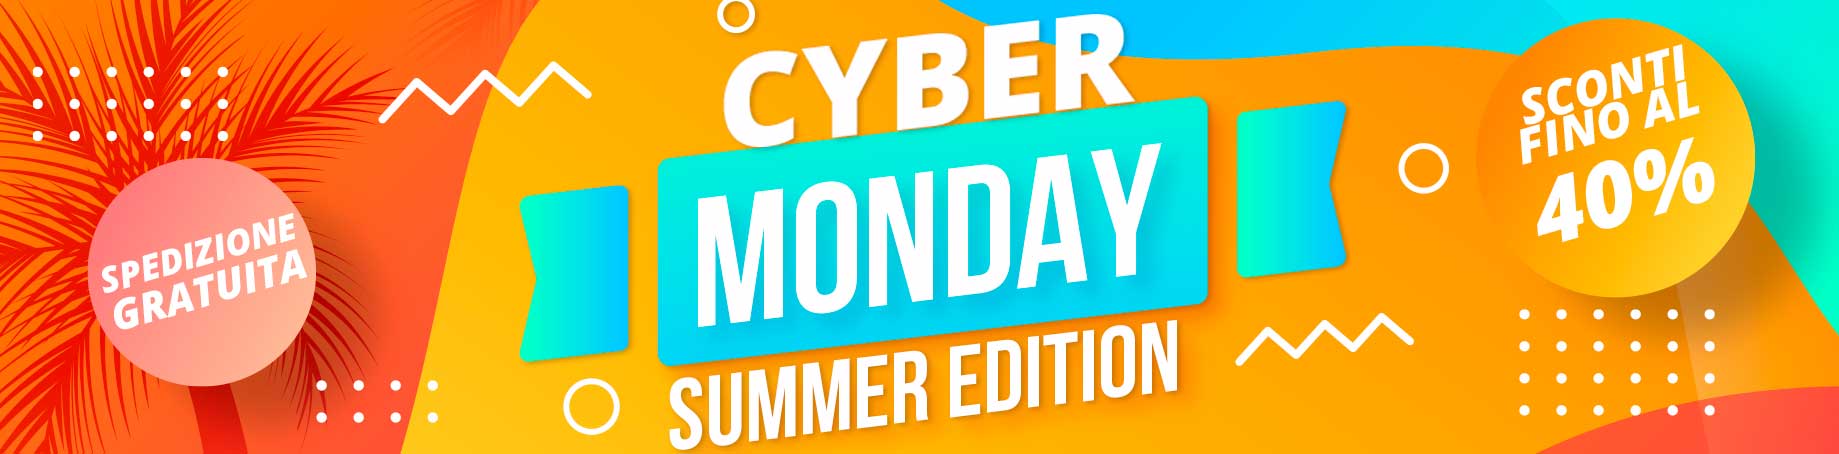 CYBER MONDAY SUMMER EDITION